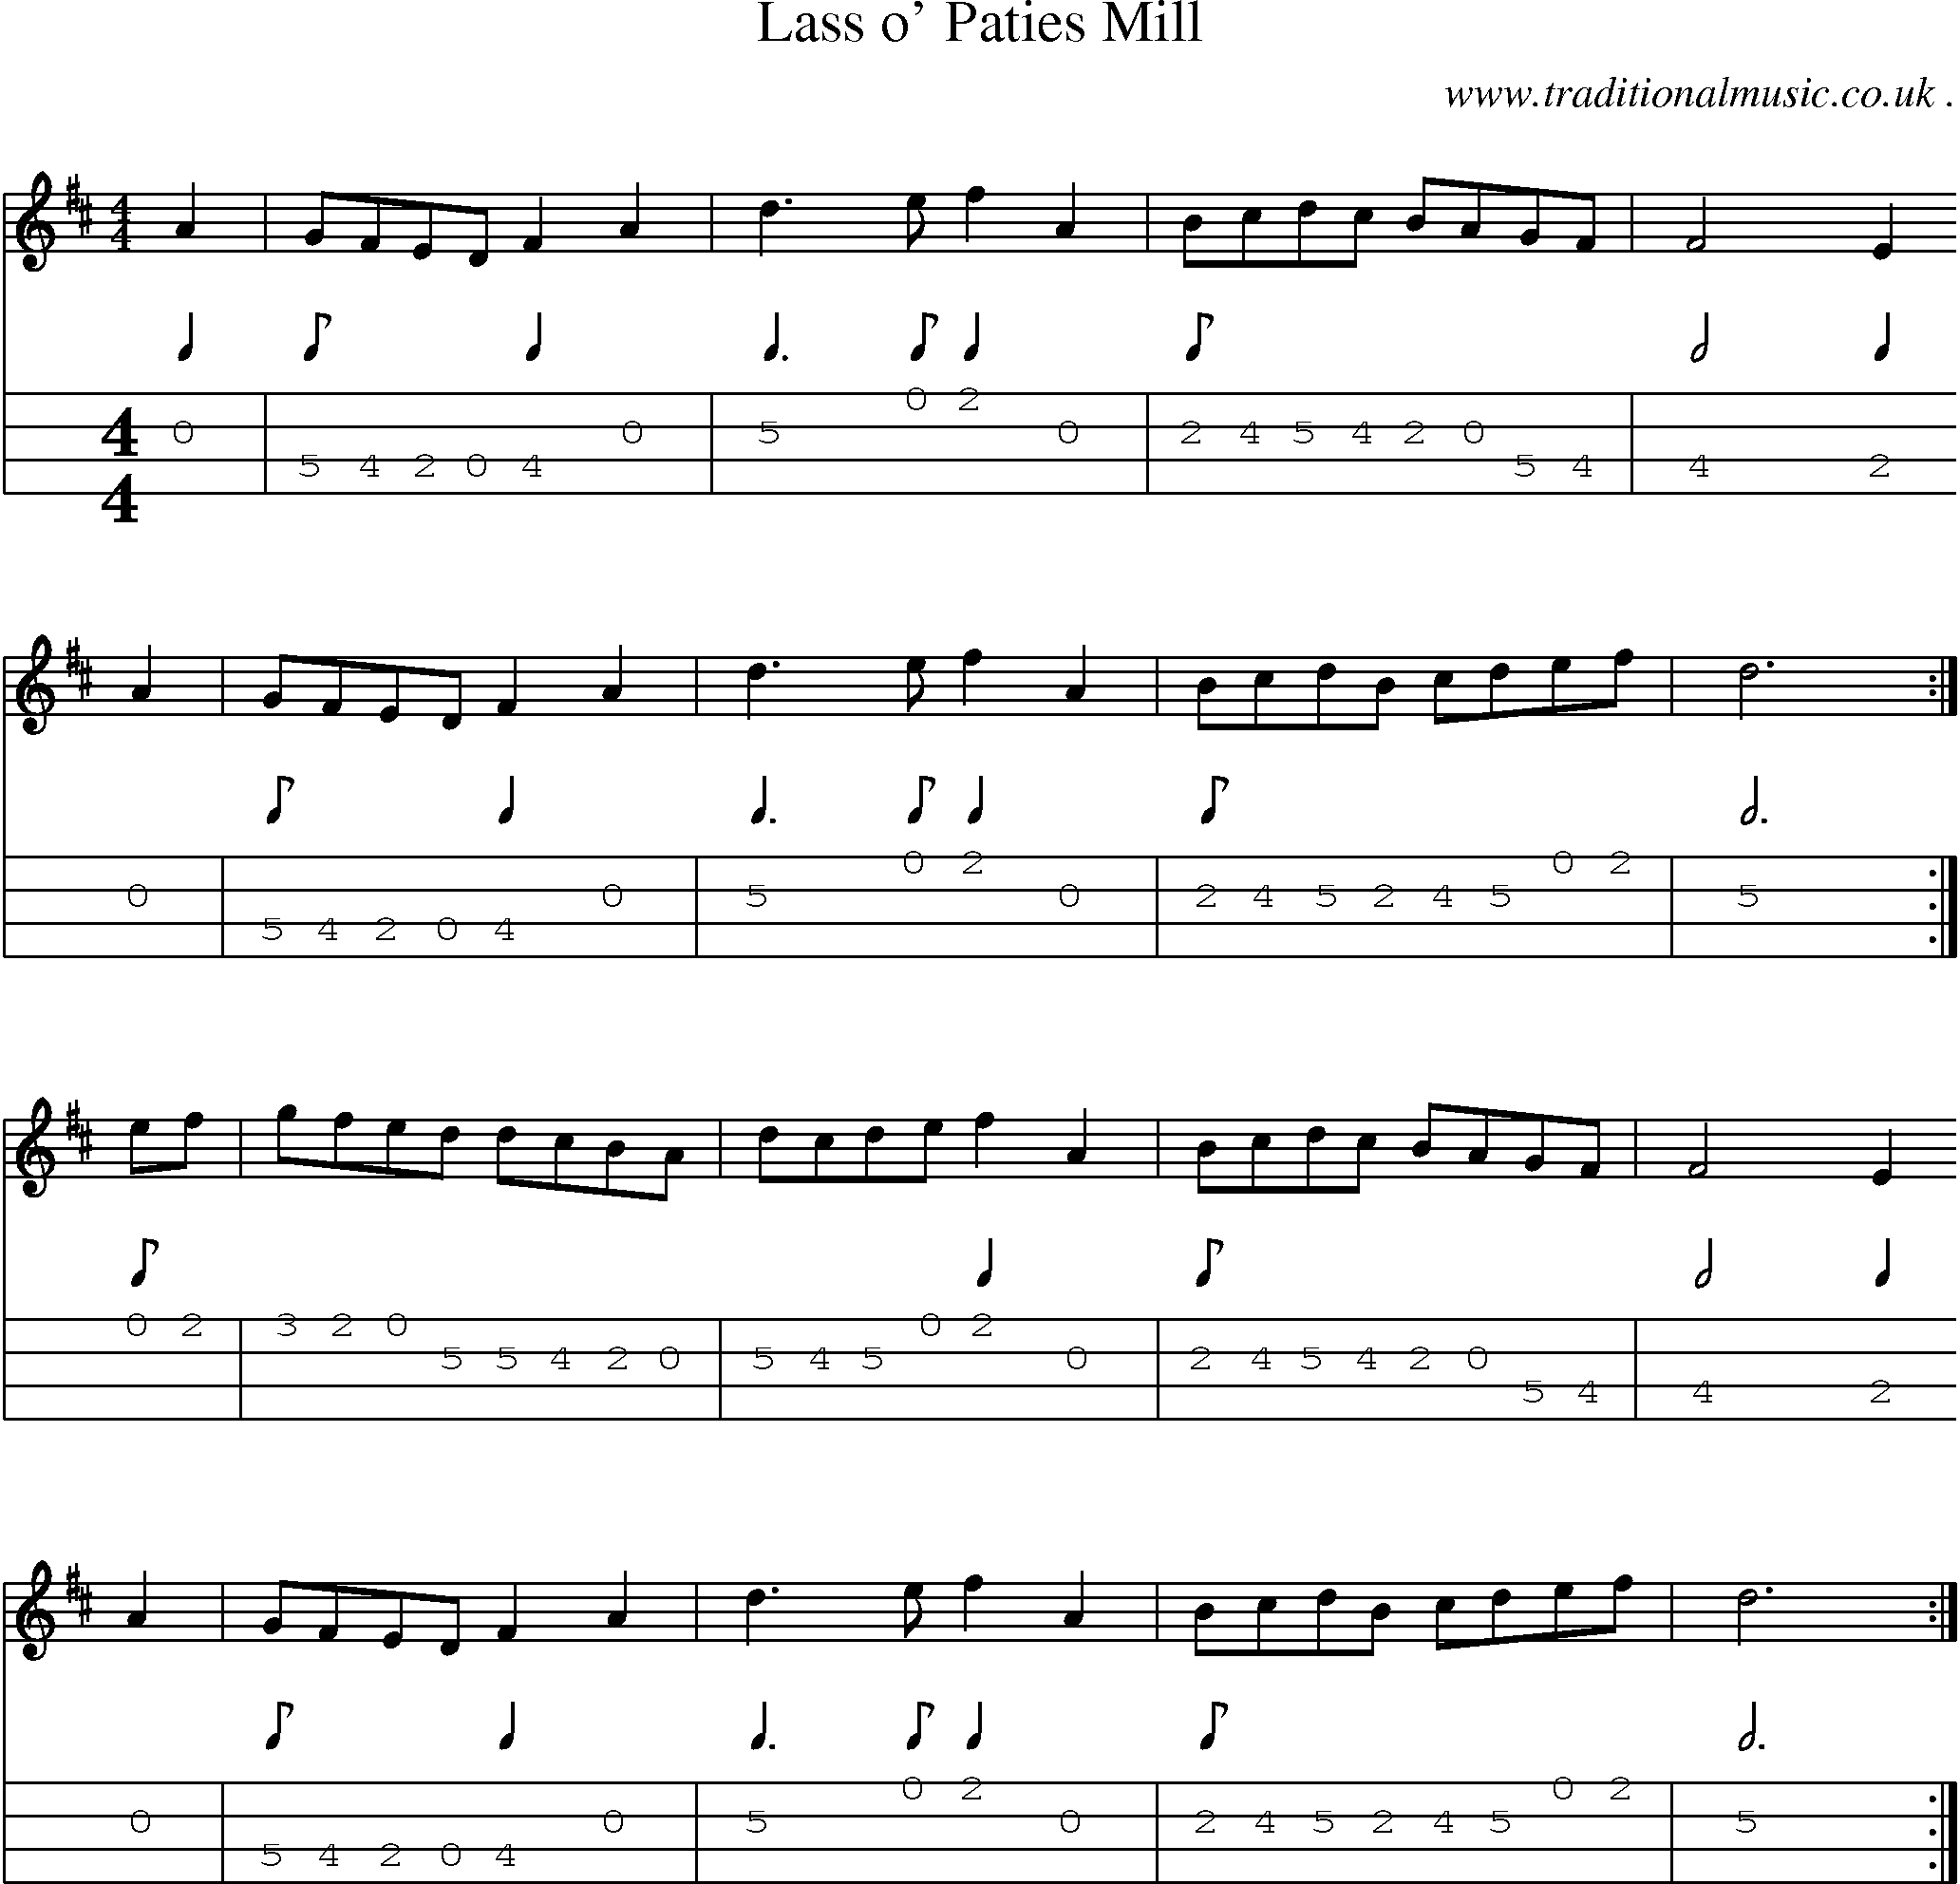 Sheet-music  score, Chords and Mandolin Tabs for Lass O Paties Mill